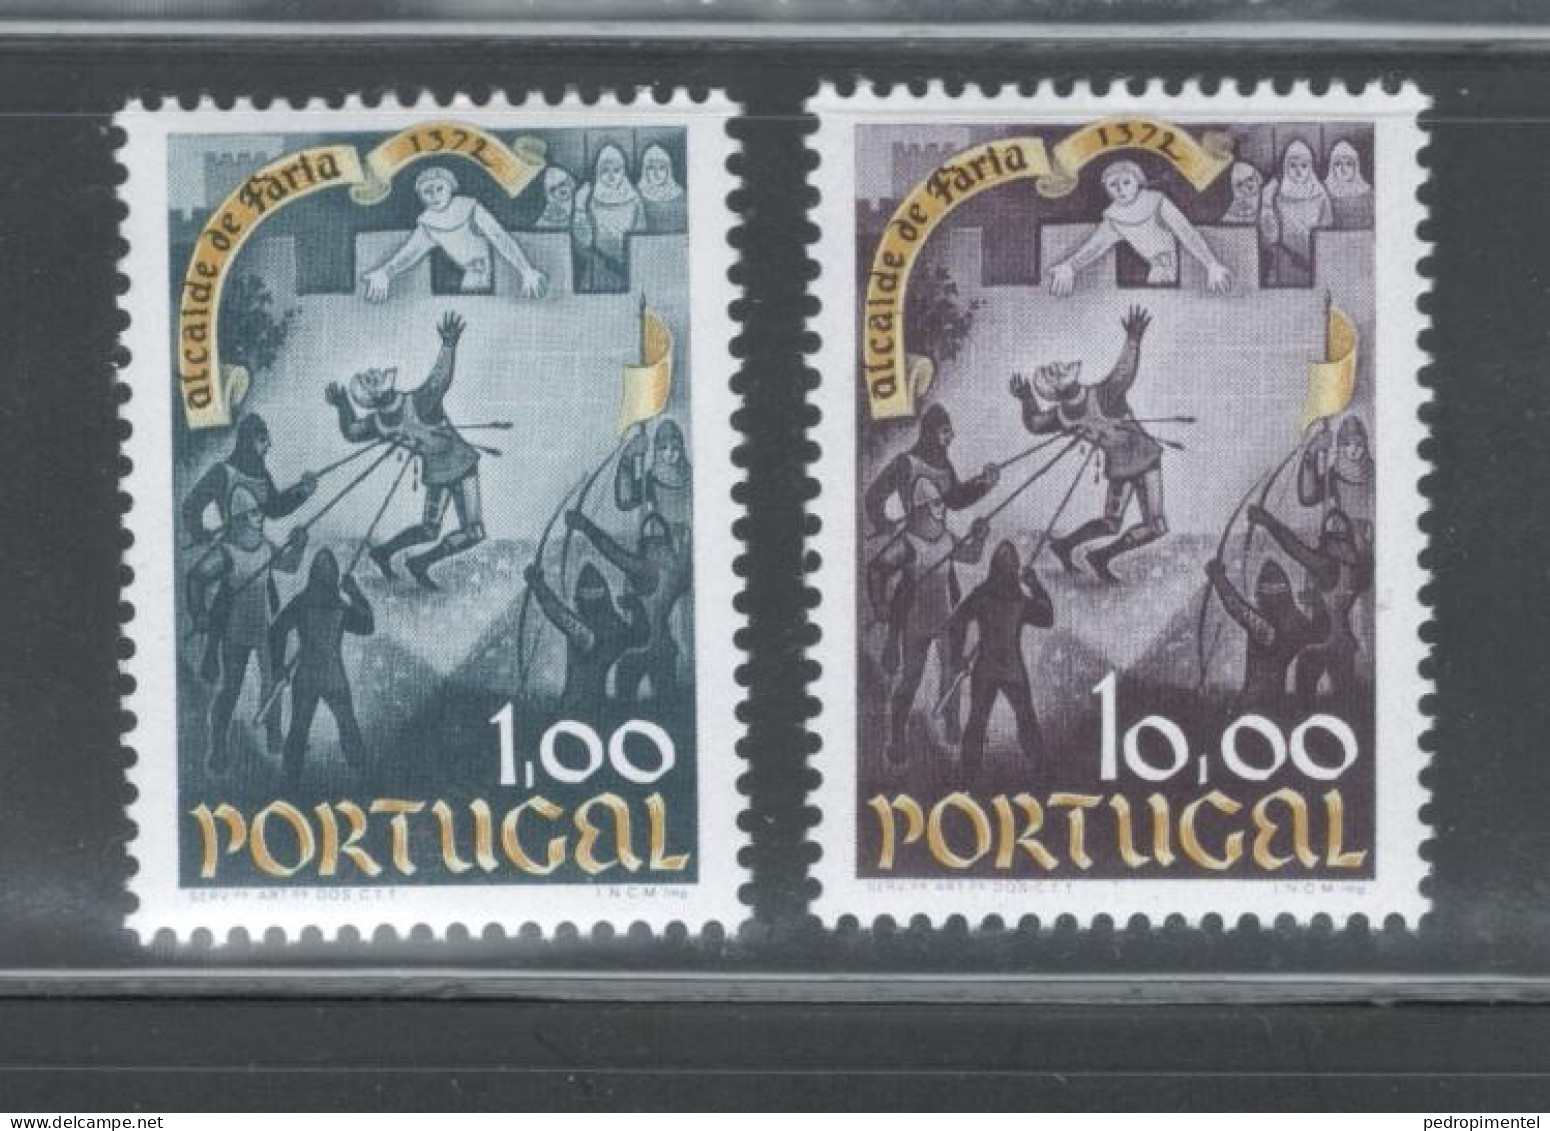 Portugal Stamps 1973 "Courage Goncalves Faria" Condition MNH #1204-1205 - Ongebruikt